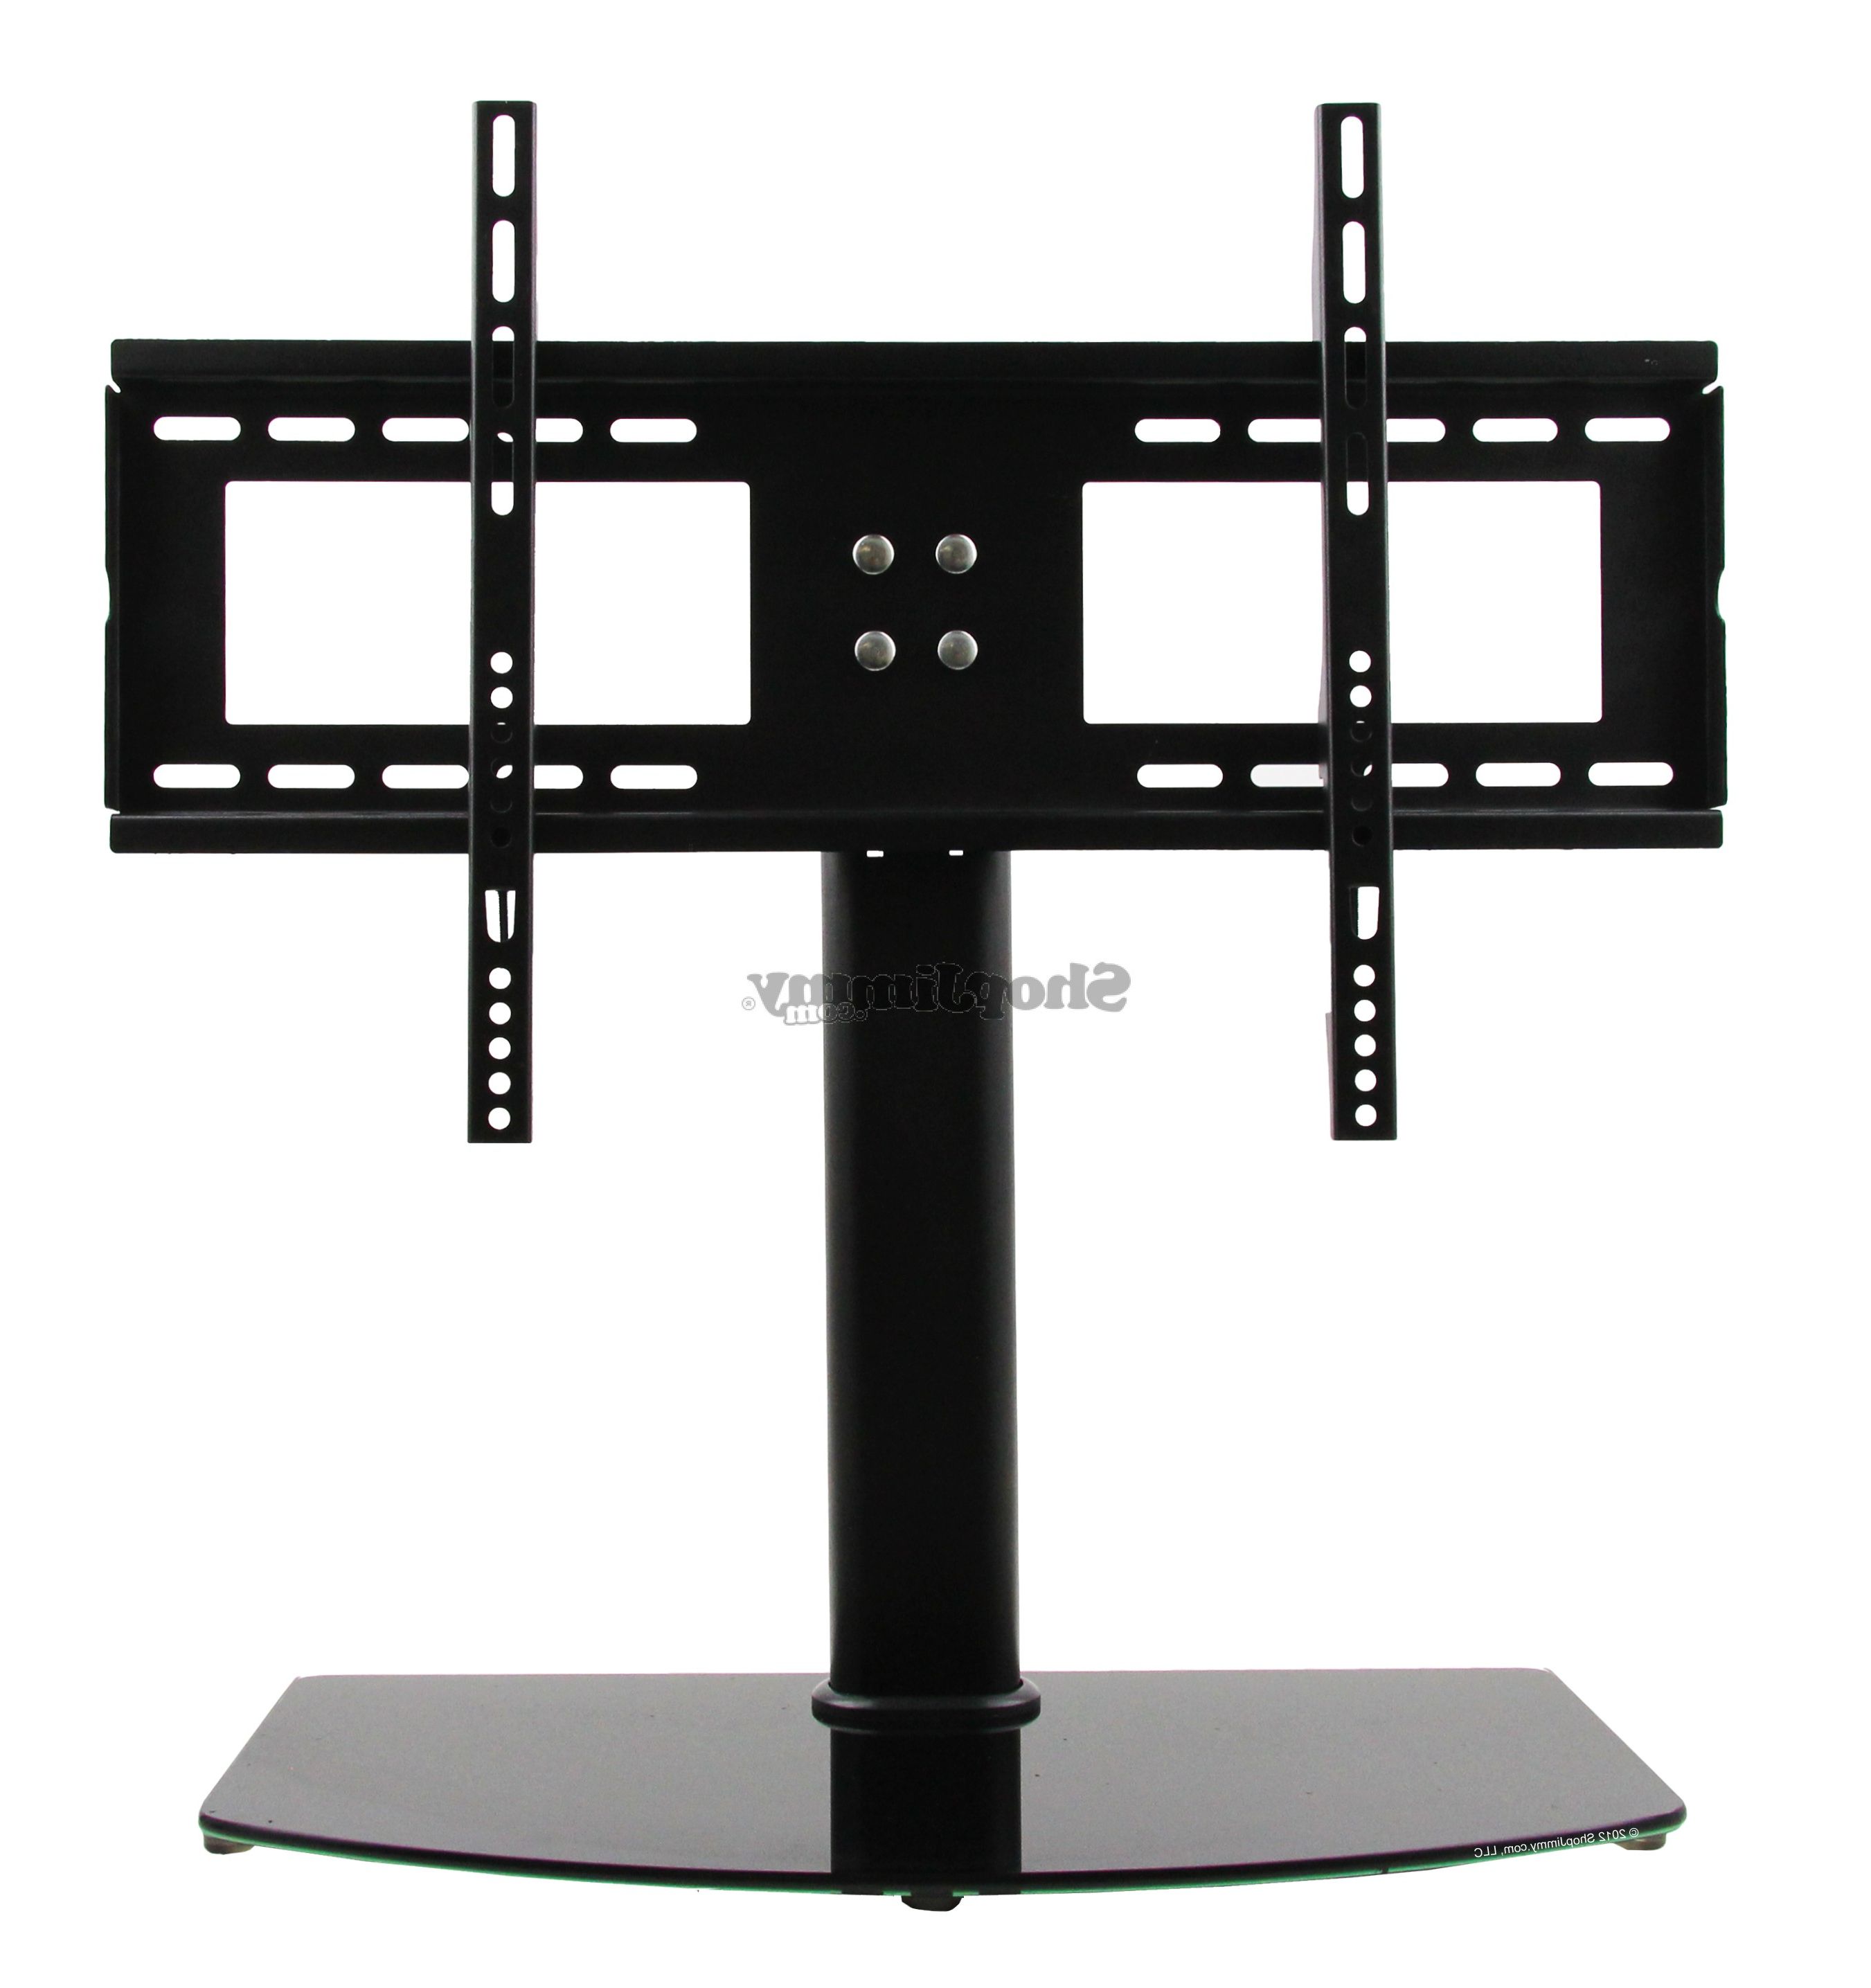 24 Inch Deep Tv Stands With Regard To Most Up To Date Universal Tv Stand/base + Wall Mount For 37" 55" Flat Screen Tvs (View 20 of 20)